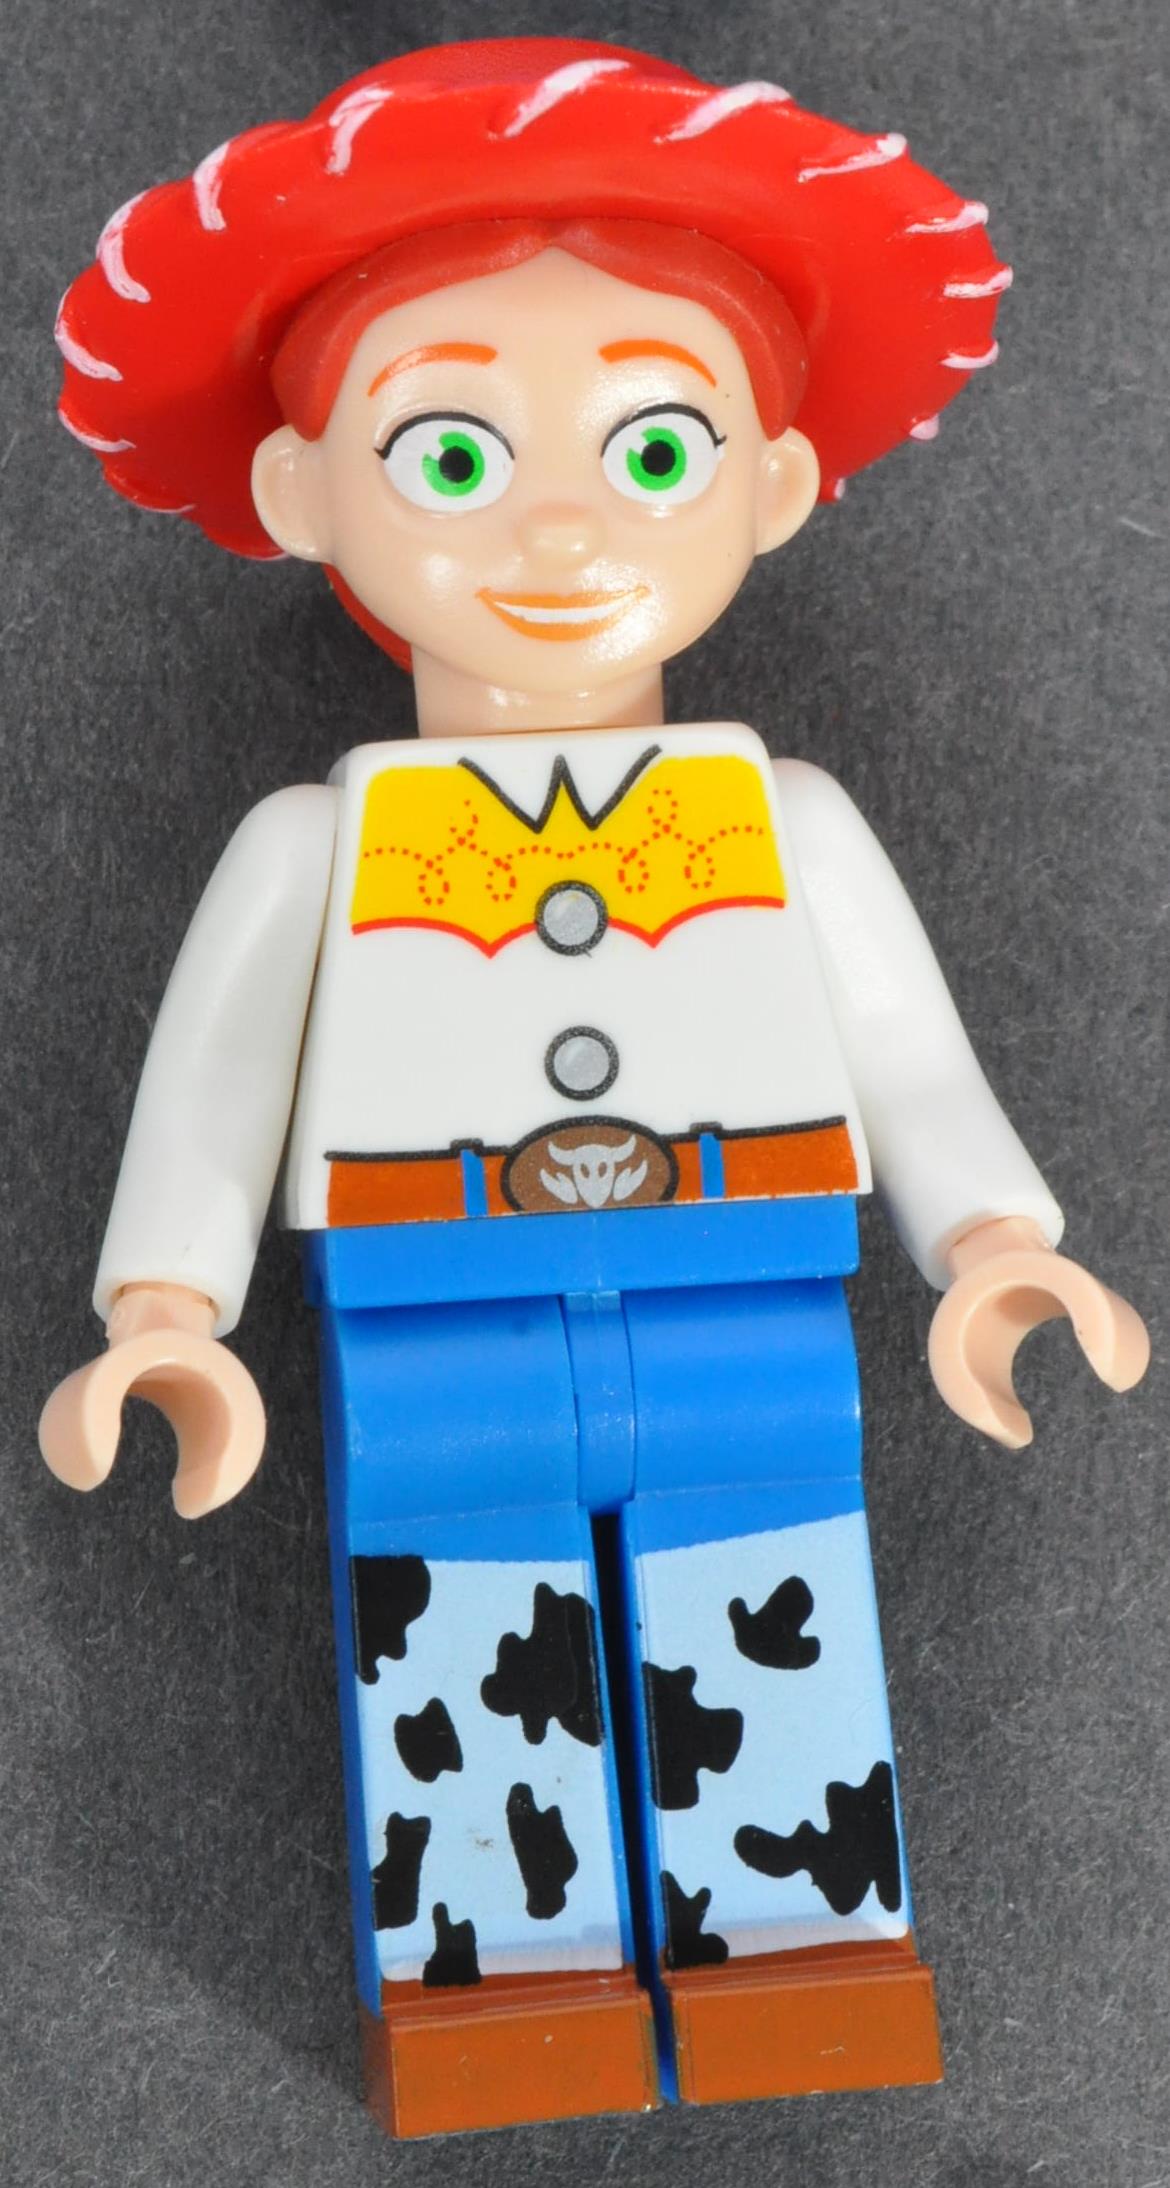 LEGO MINIFIGURES - COLLECTION OF ASSORTED TOY STORY MINIFIGURES - Image 6 of 7